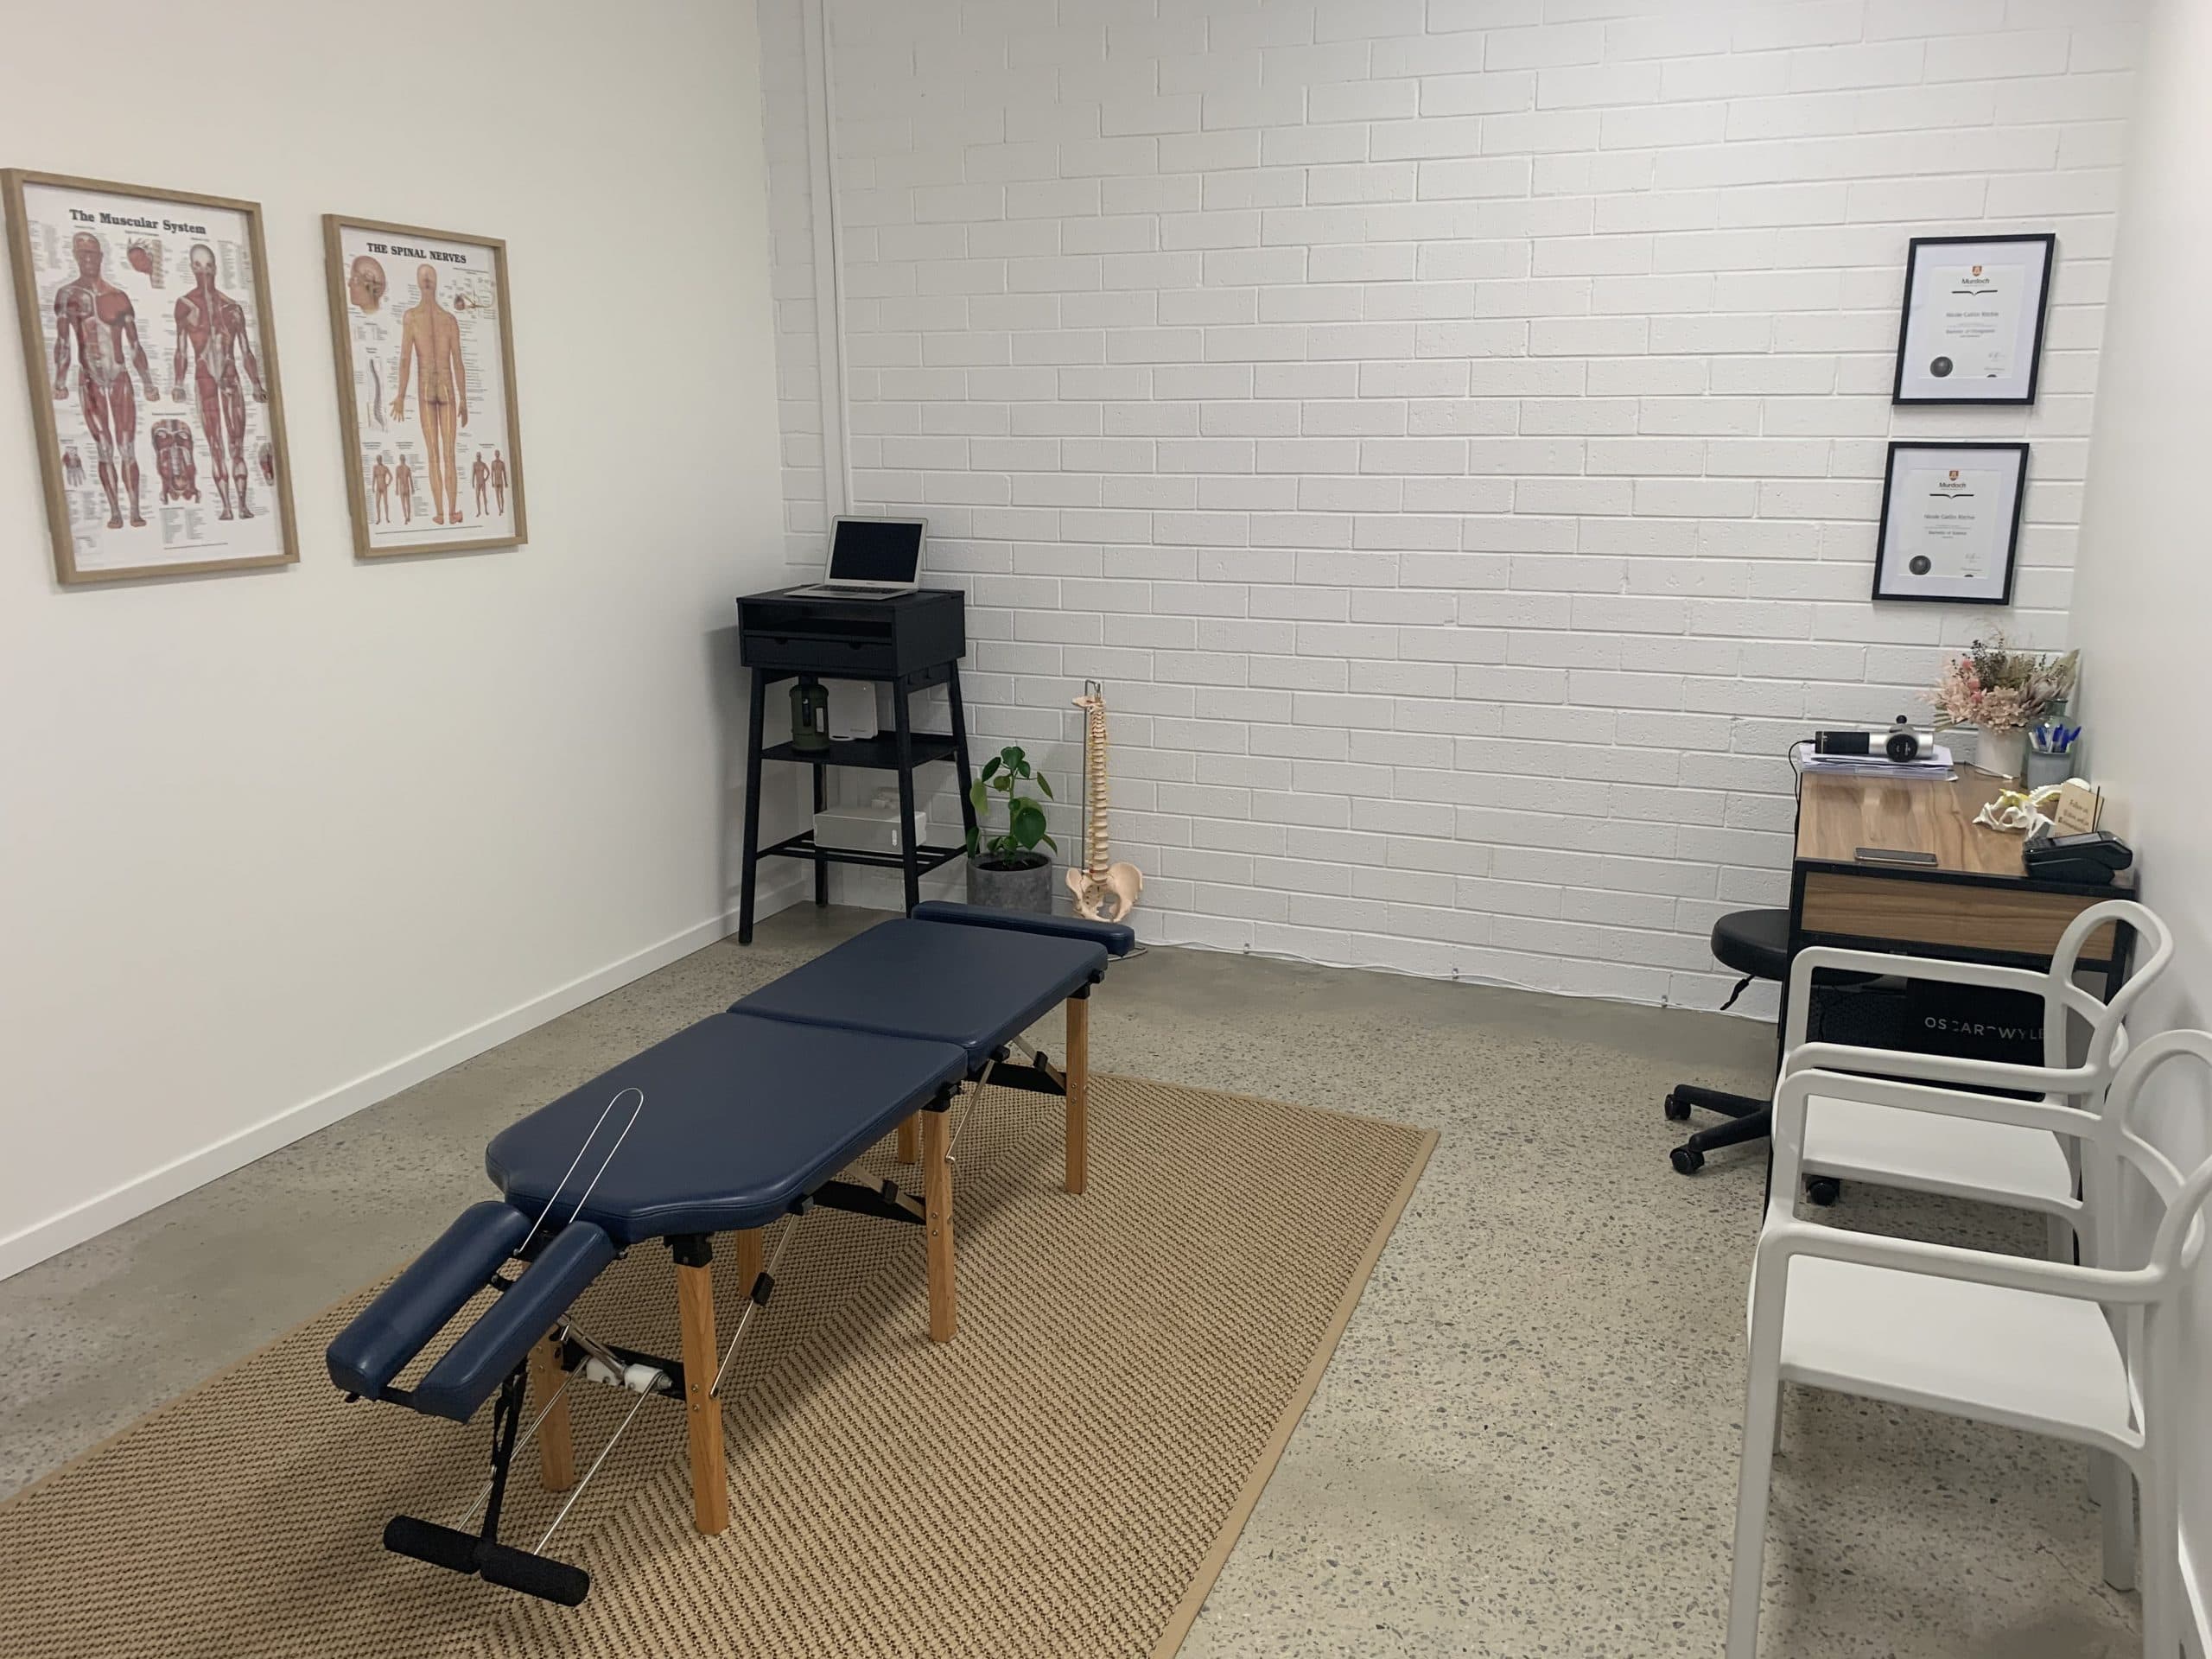 Our Treatment Space